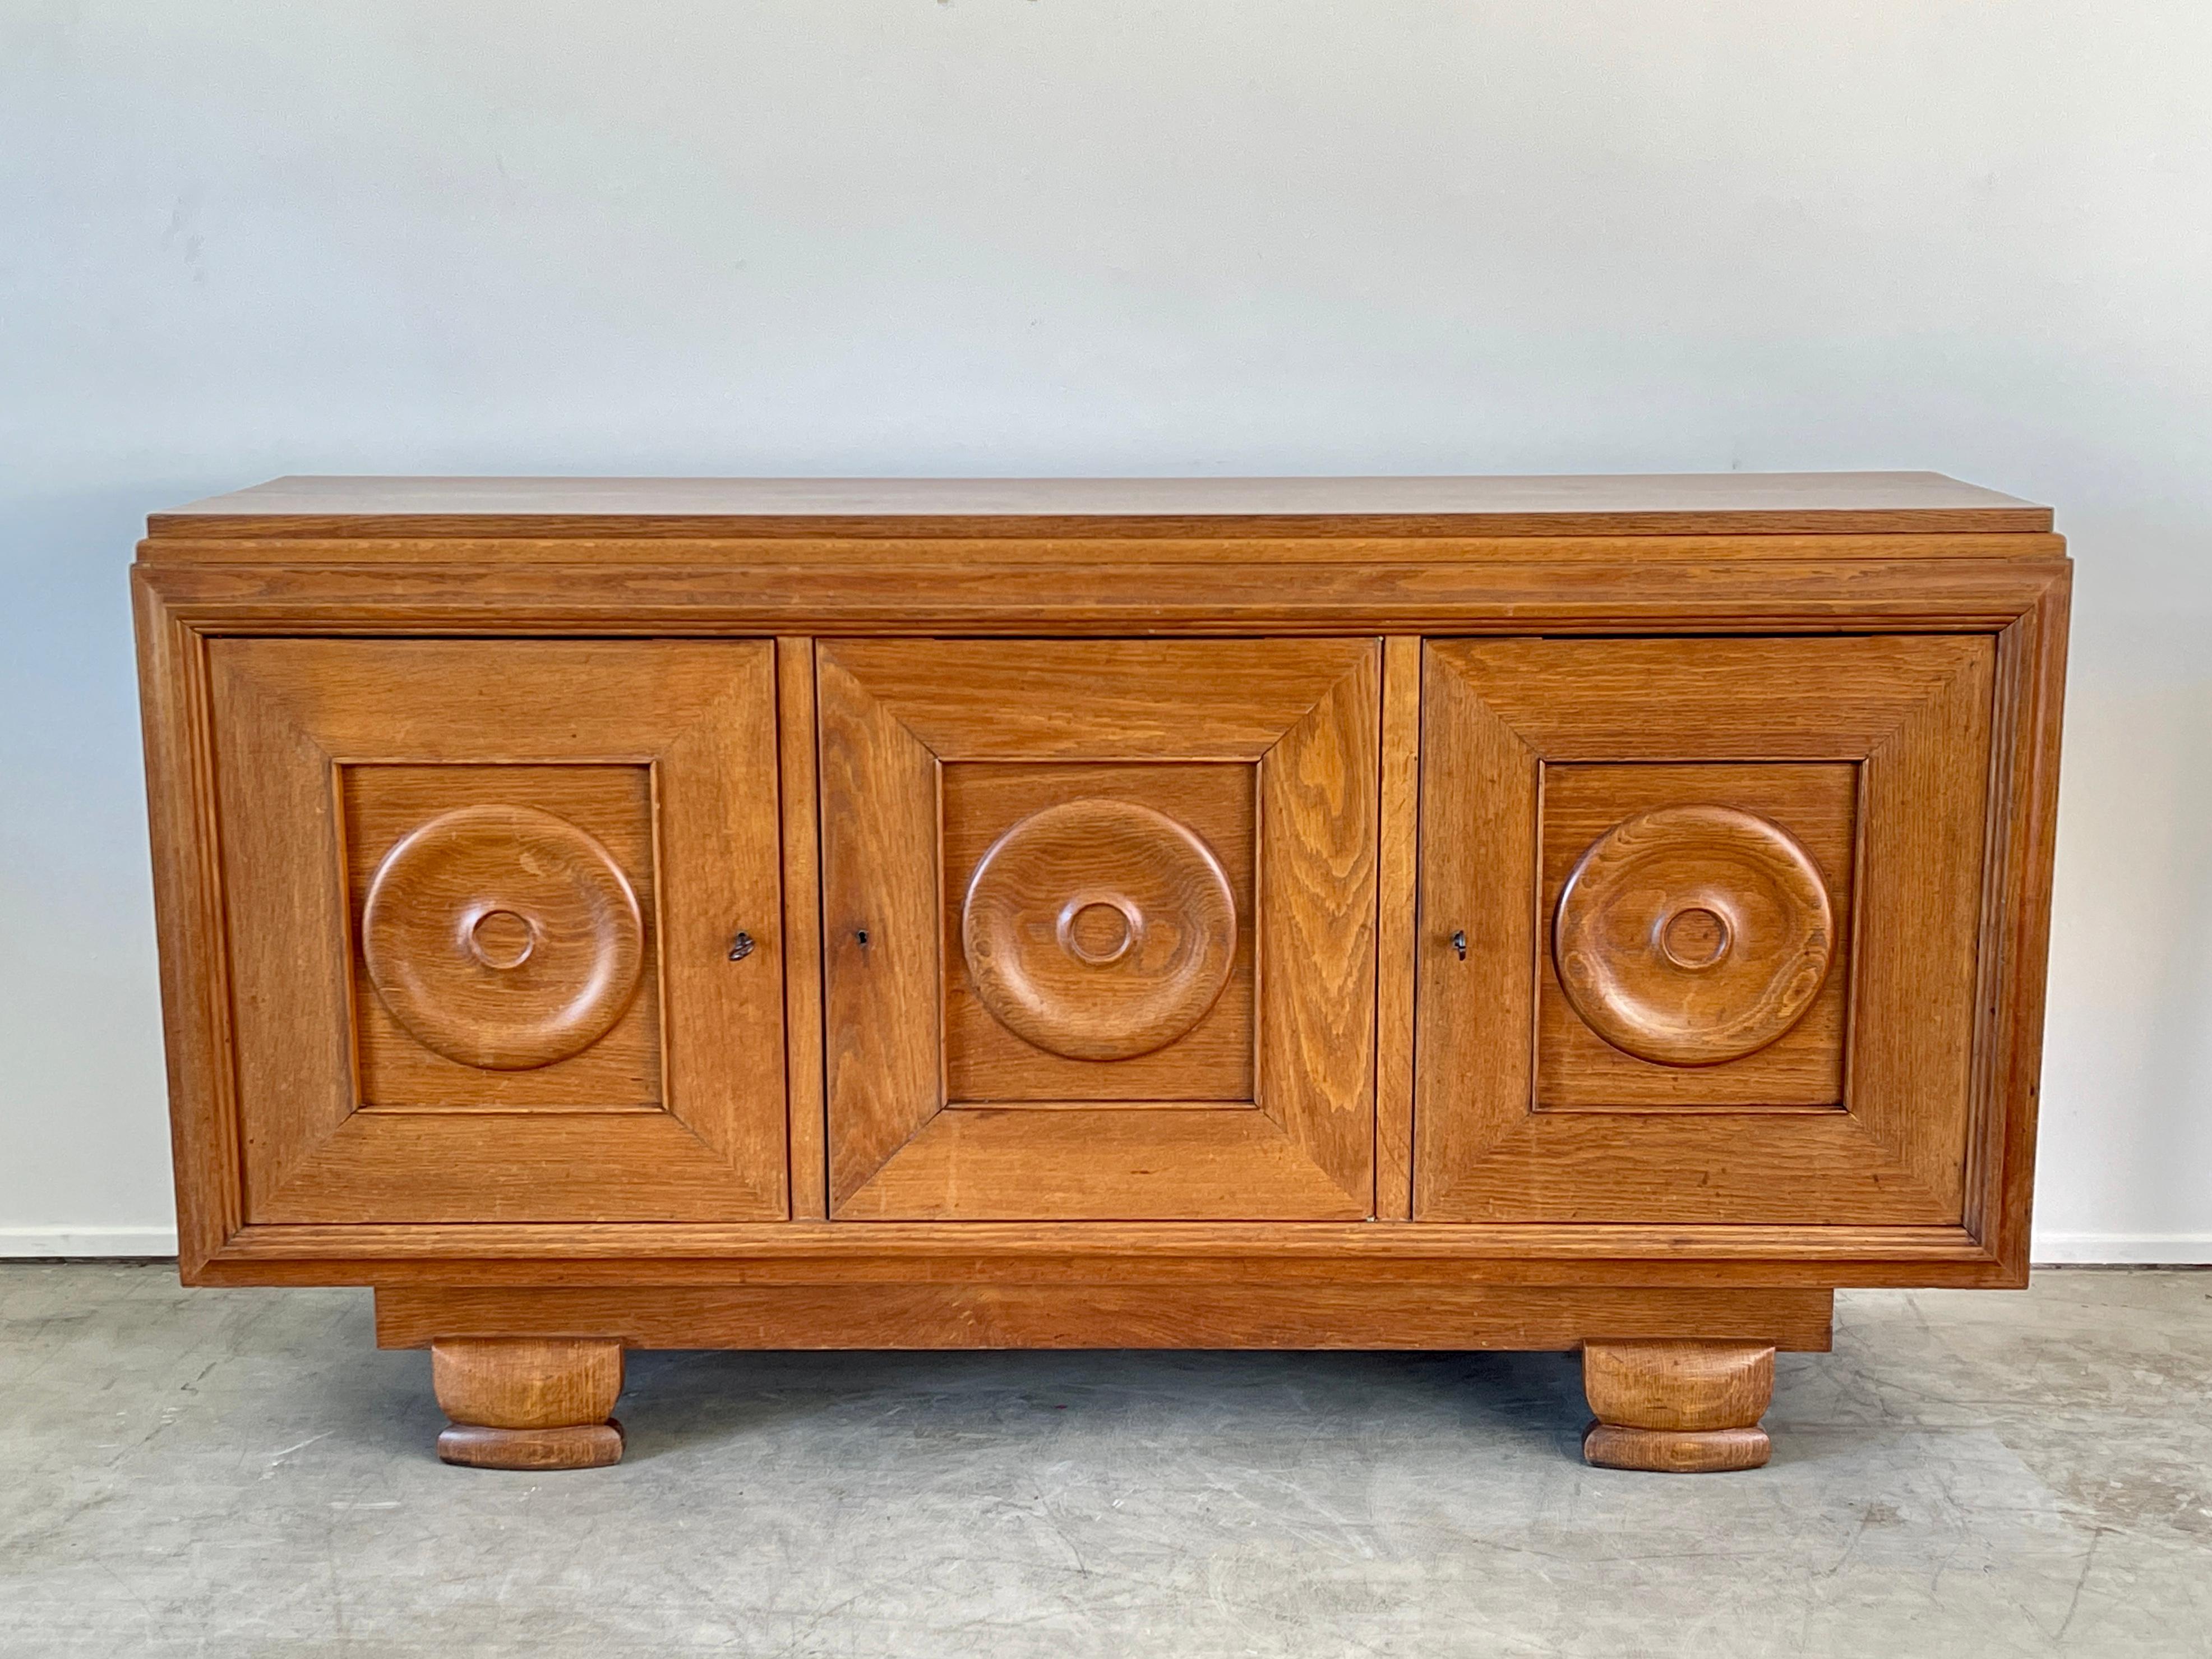 1940's French Oak cabinet with carved concentric circles on the 3 front doors.
Wonderful carved legs and warm patina to wood!